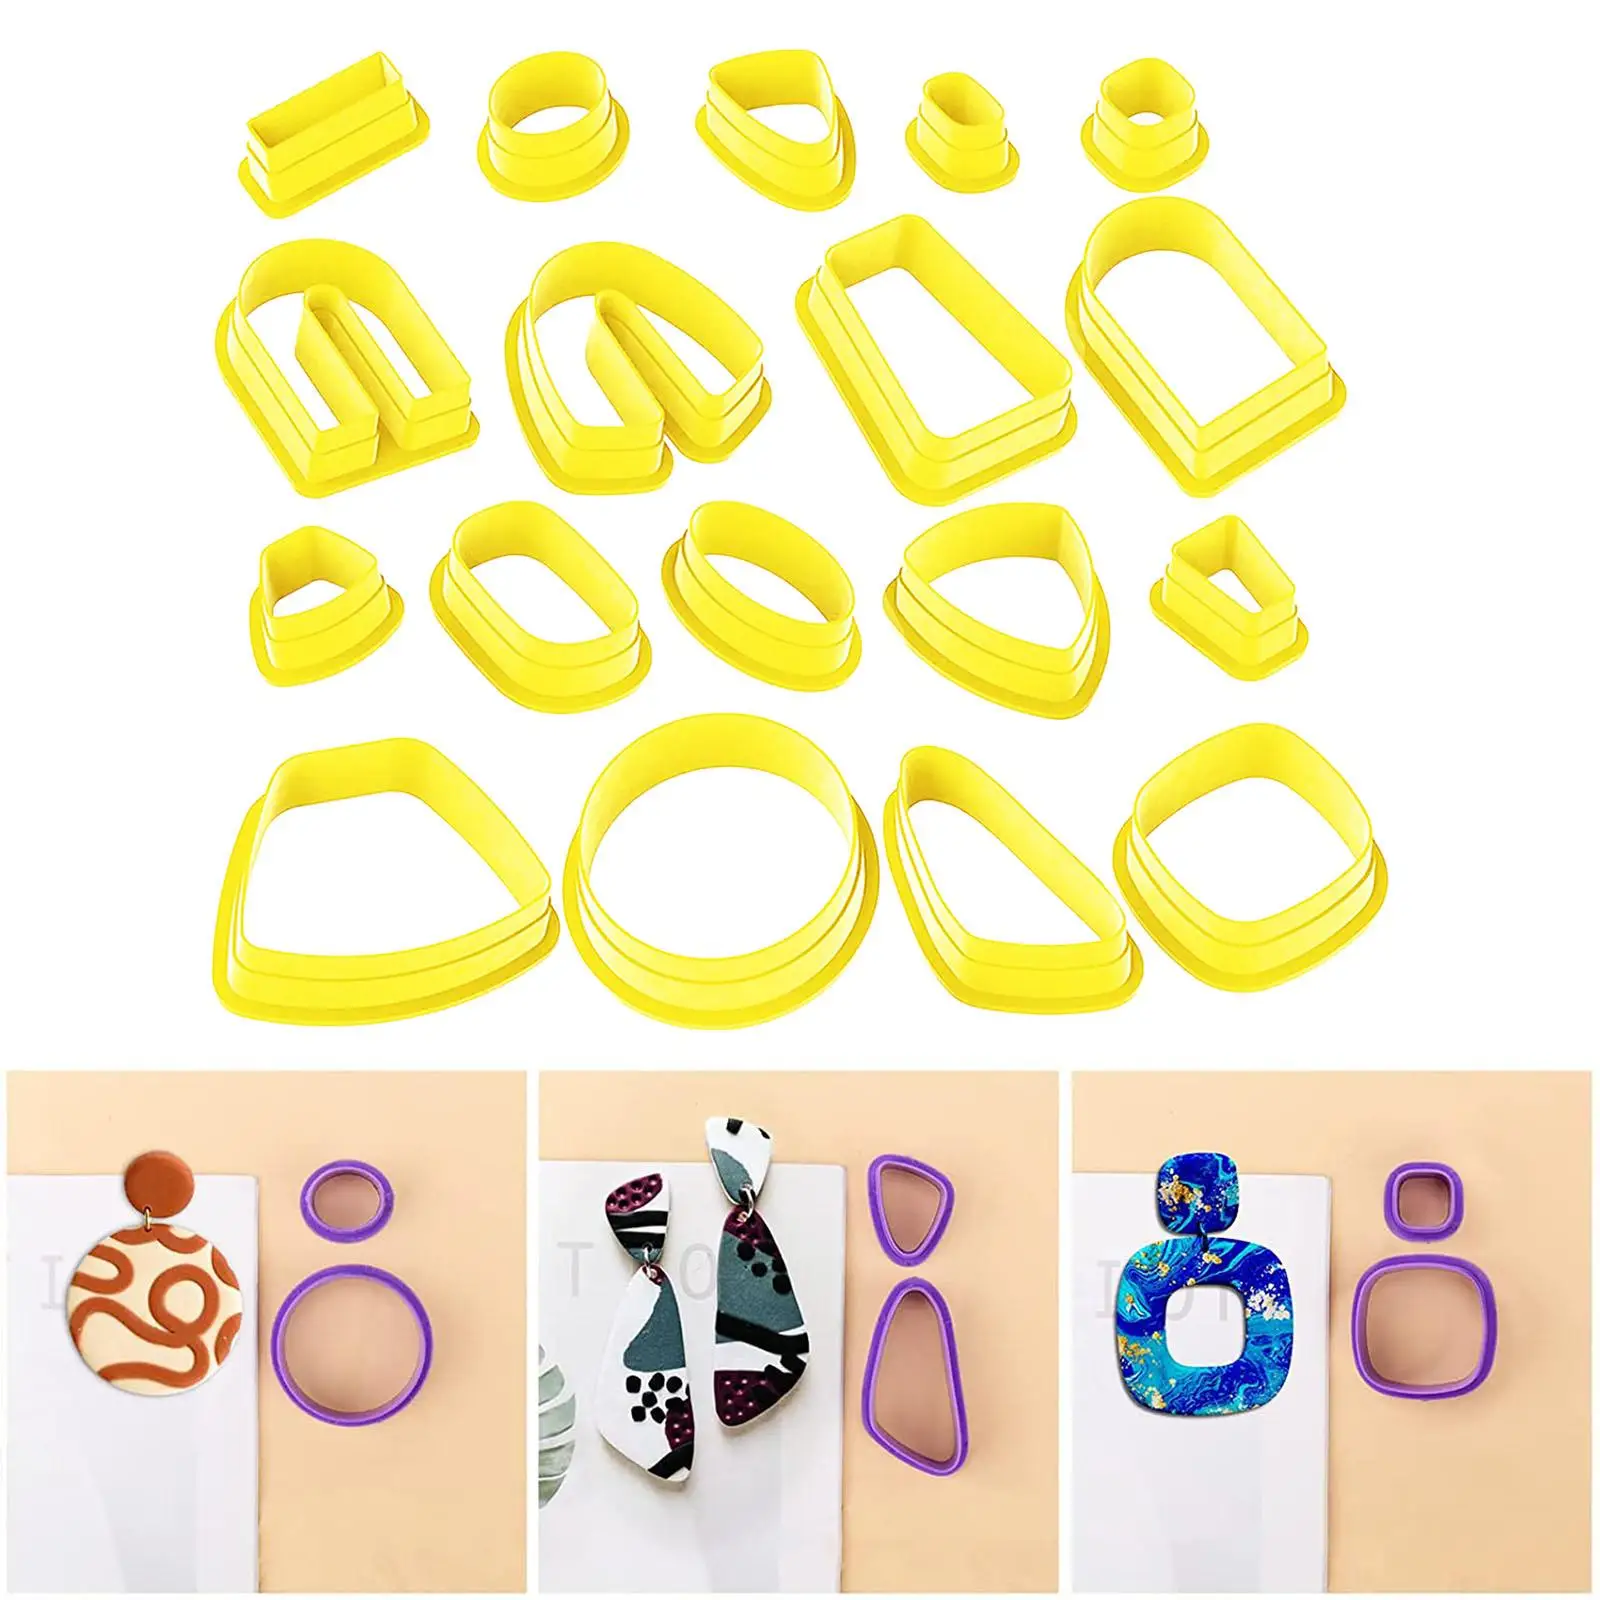 18x Plastic Polymer Clay Cutters Earring Making Kit Different Shapes Jewelry Making Molds